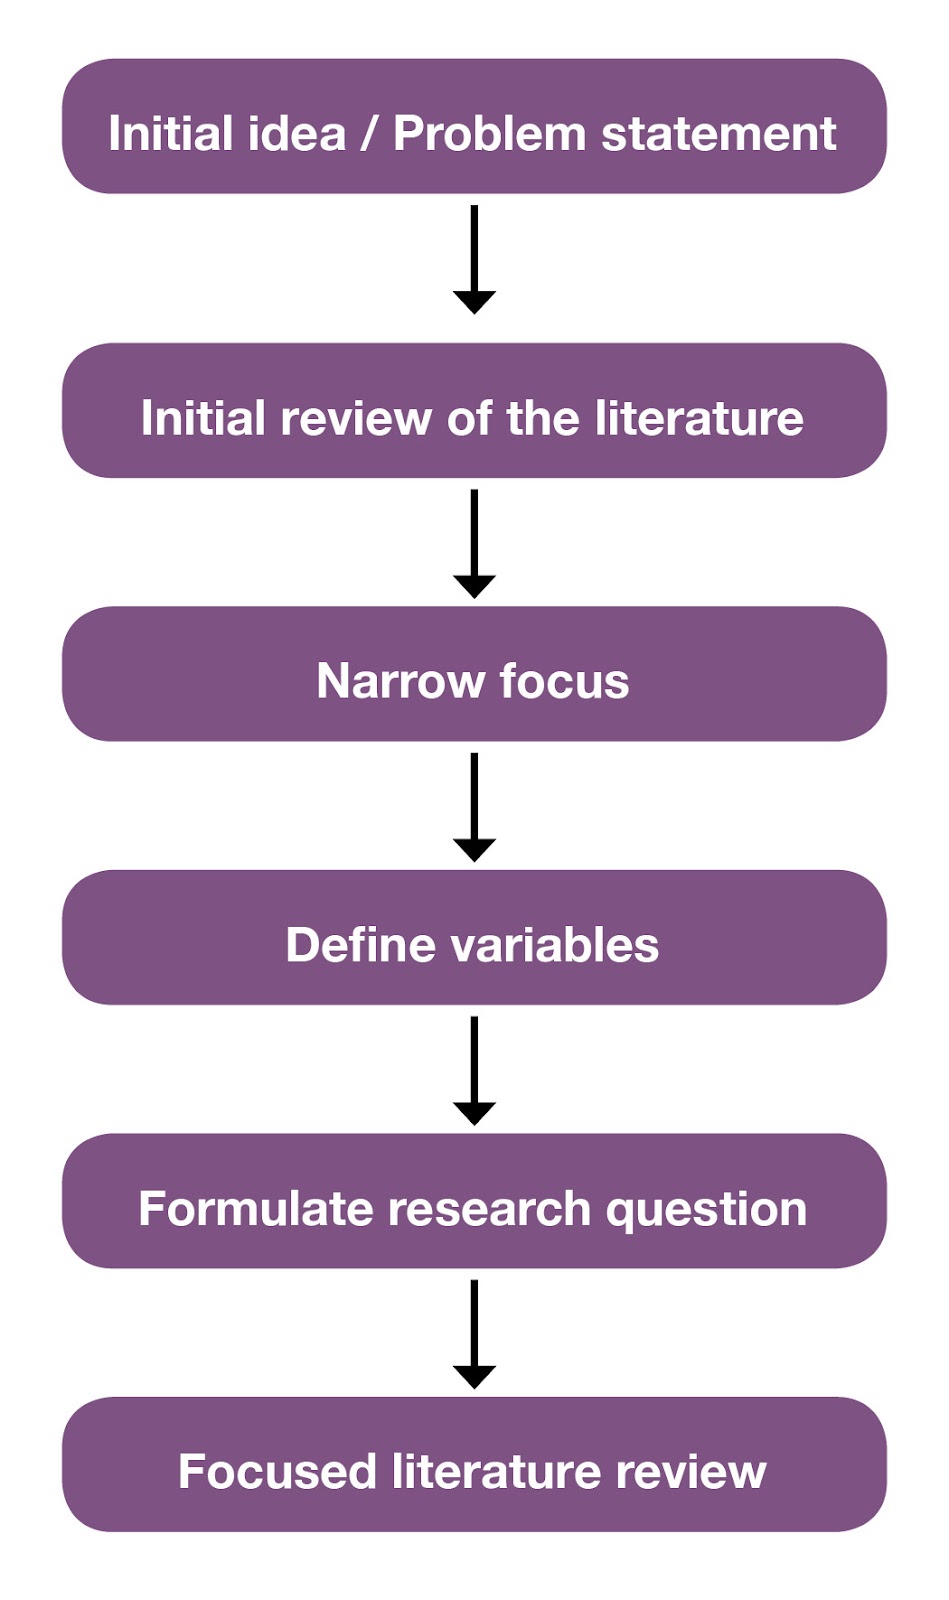 6 boxes, basic steps in literature review process; initial idea/problem statement to initial review of the literature. After narrow focus & define variables, formulate research question & then focused literature review